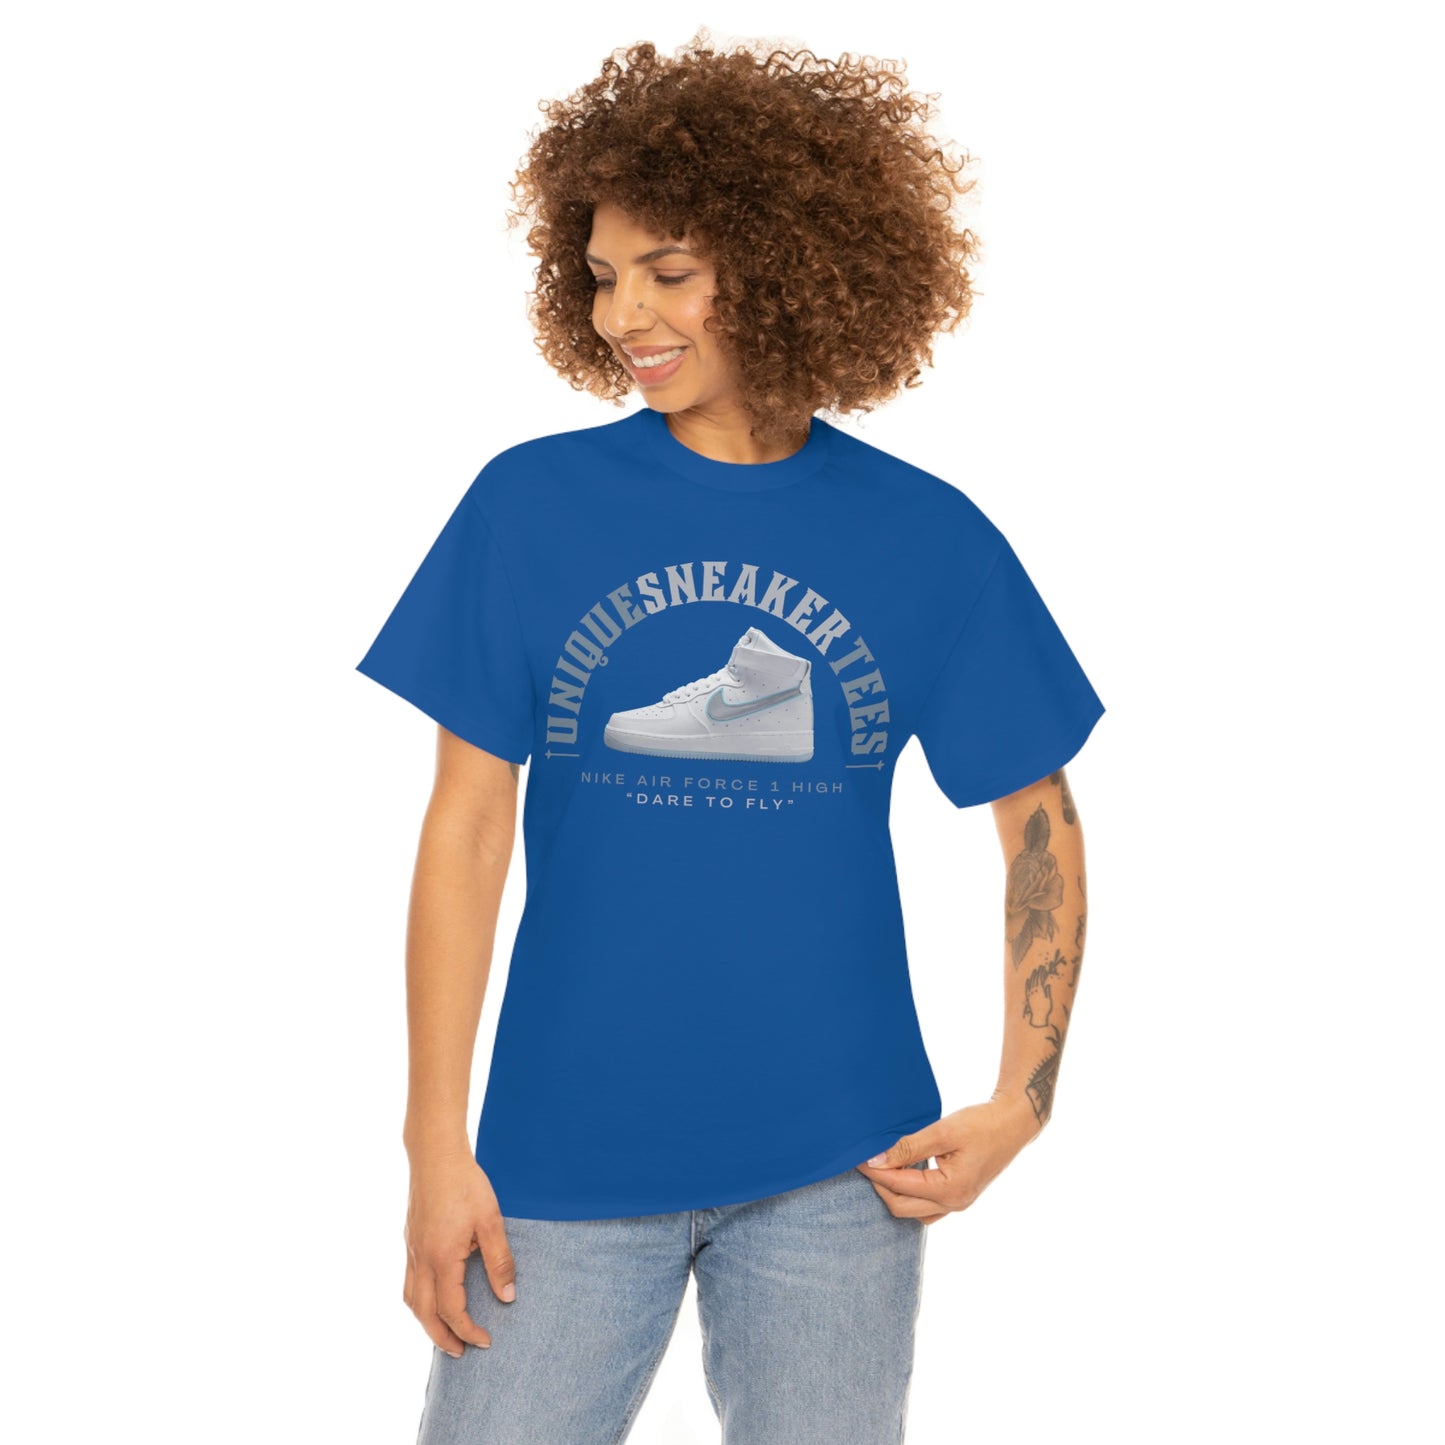 Air Force 1 High Dare To Fly Tee